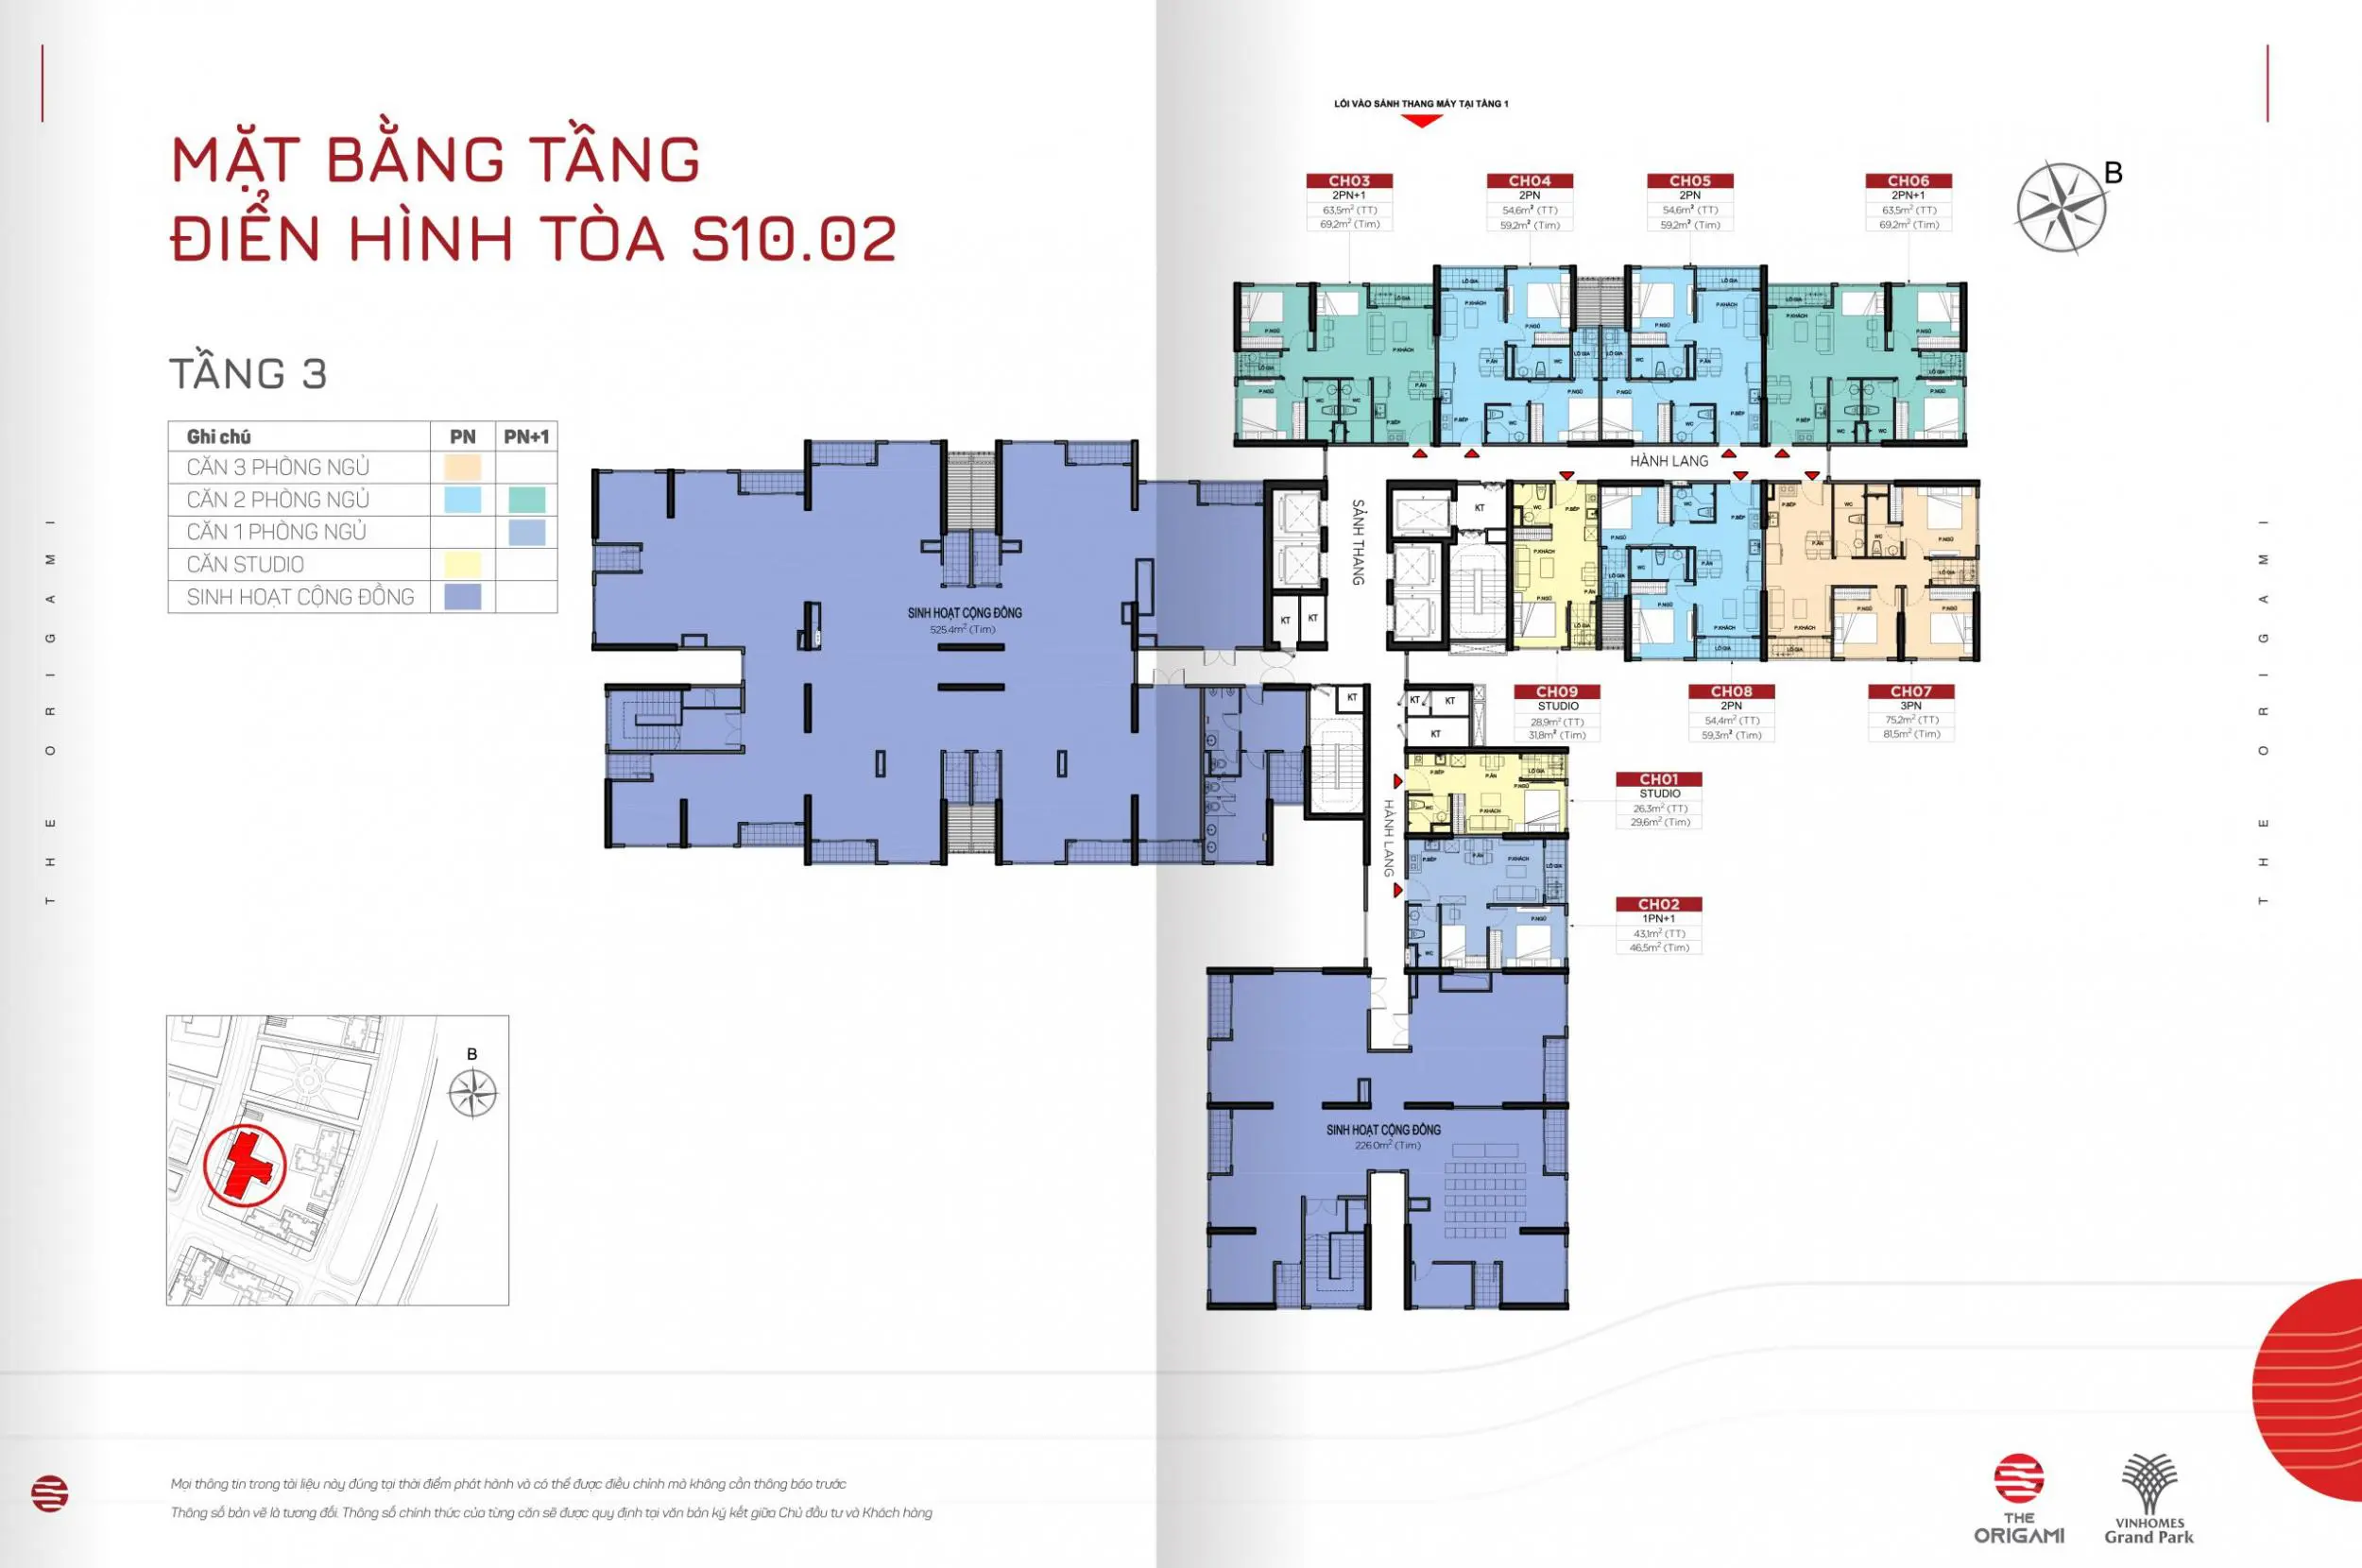 Mặt bằng S10.02 The Origami Vinhomes Grand Park - tầng 3